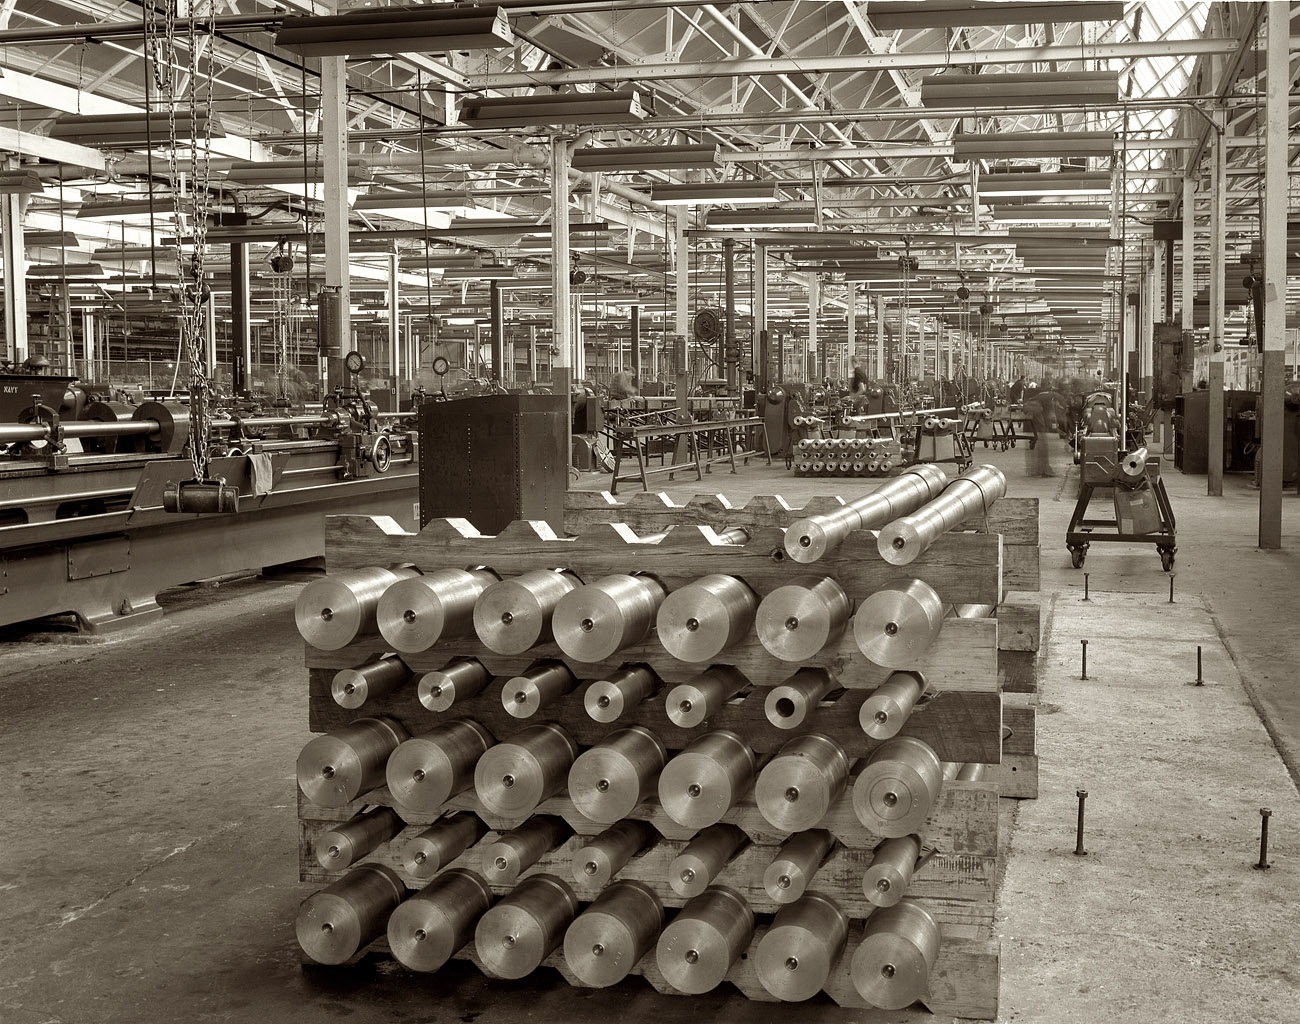 1942. Chrysler Corporation plant at Highland Park, Detroit. "Conversion. Here, in a former automobile plant, 40 mm. anti-aircraft gun barrels are machined and made ready for front-line duty. Since they must shoot fast-moving objects at great distances, they must be finished to the very finest of tolerances." Medium format negative by Alfred Palmer for the Office of War Information. View full size.